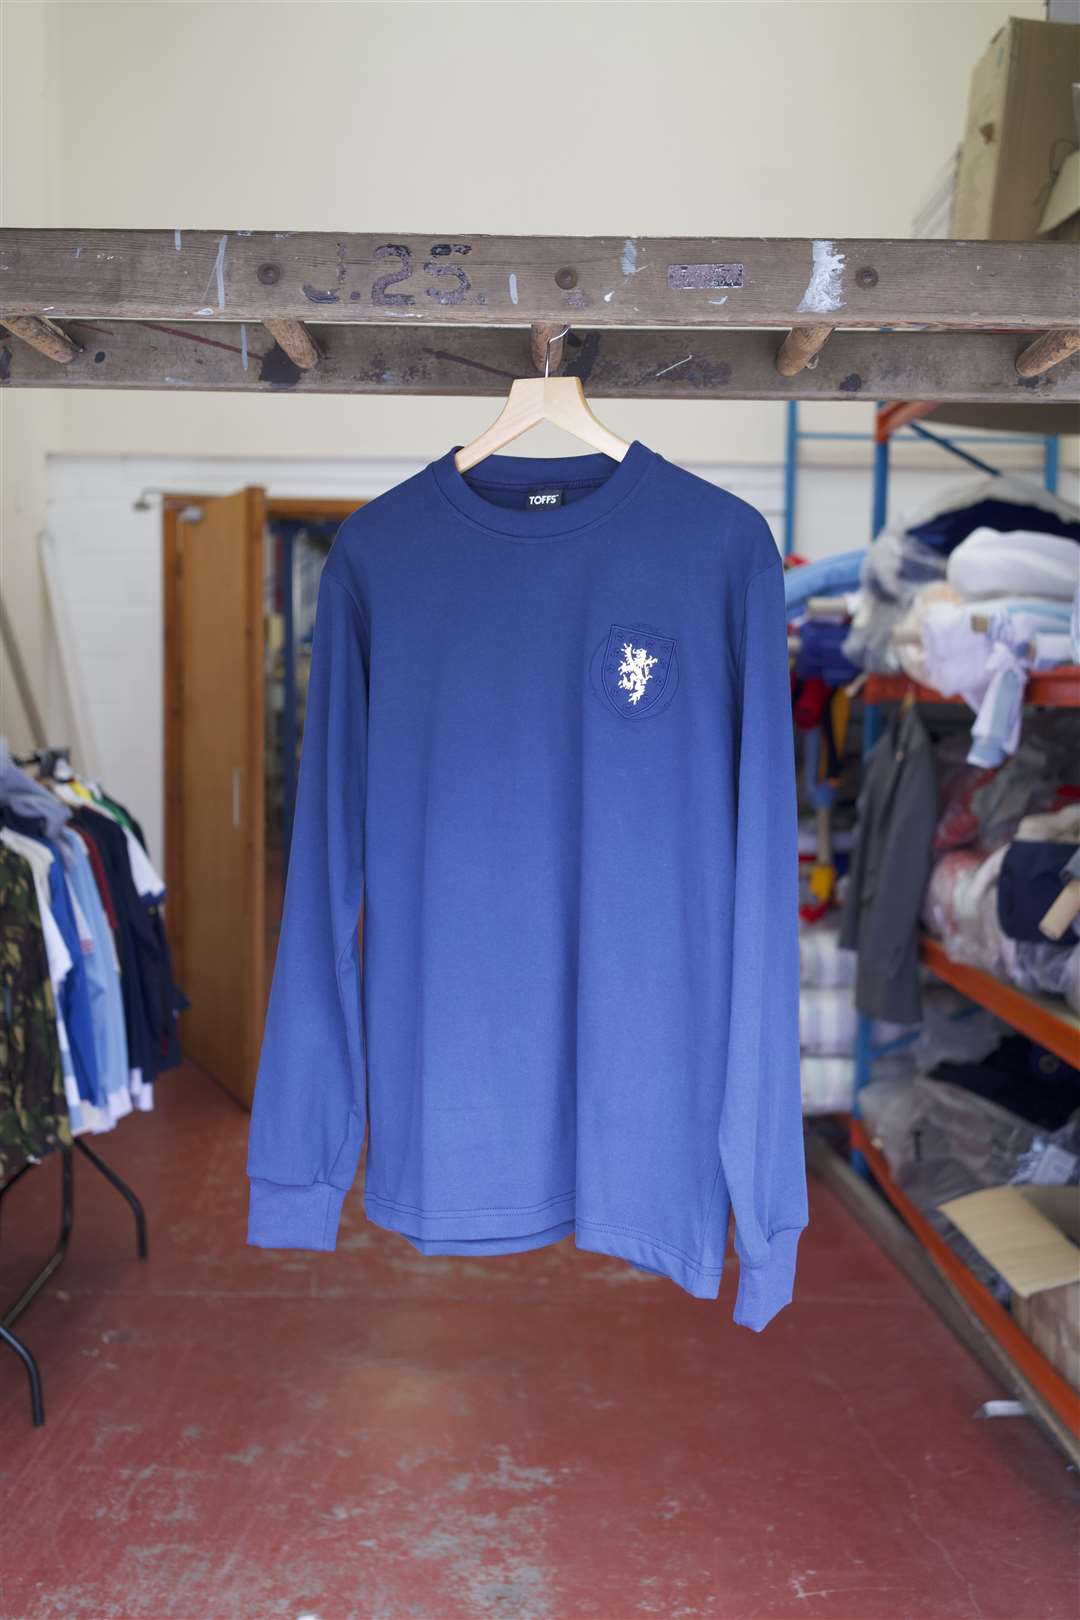 The Scotland top just hanging out in the TOFFS factory.